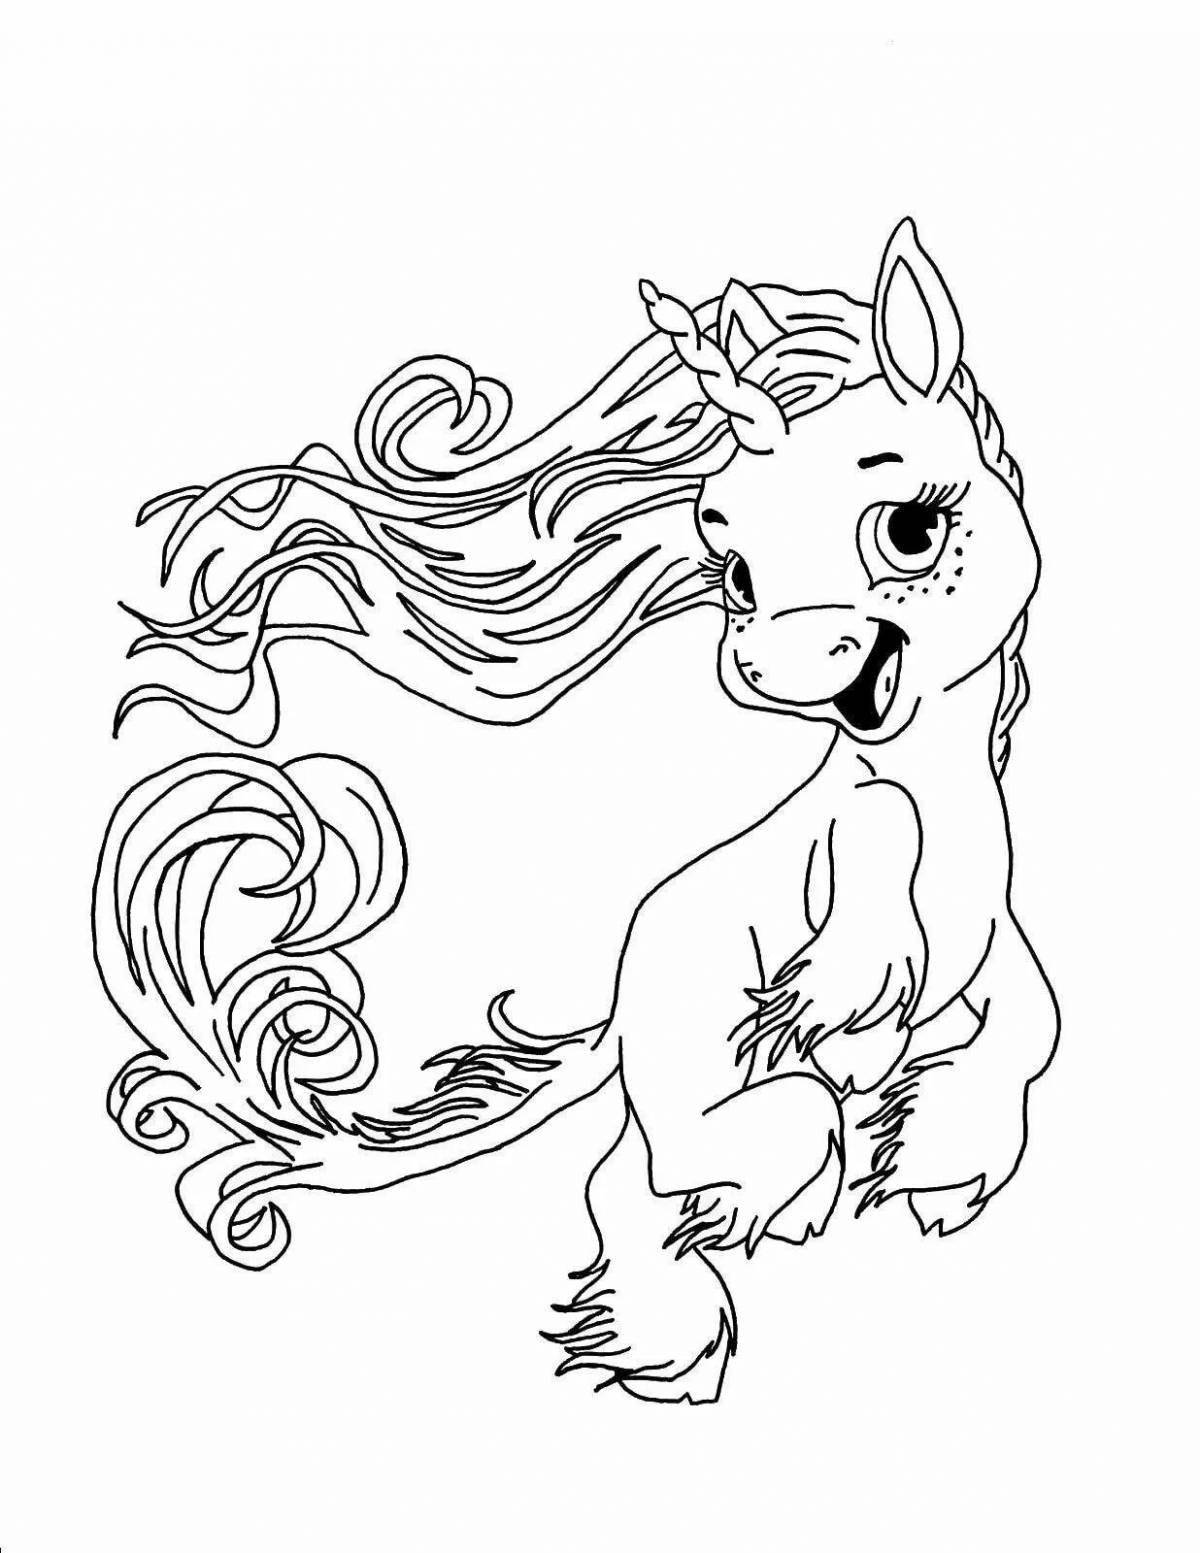 Coloring pages for girls 9 years old - very beautiful animals